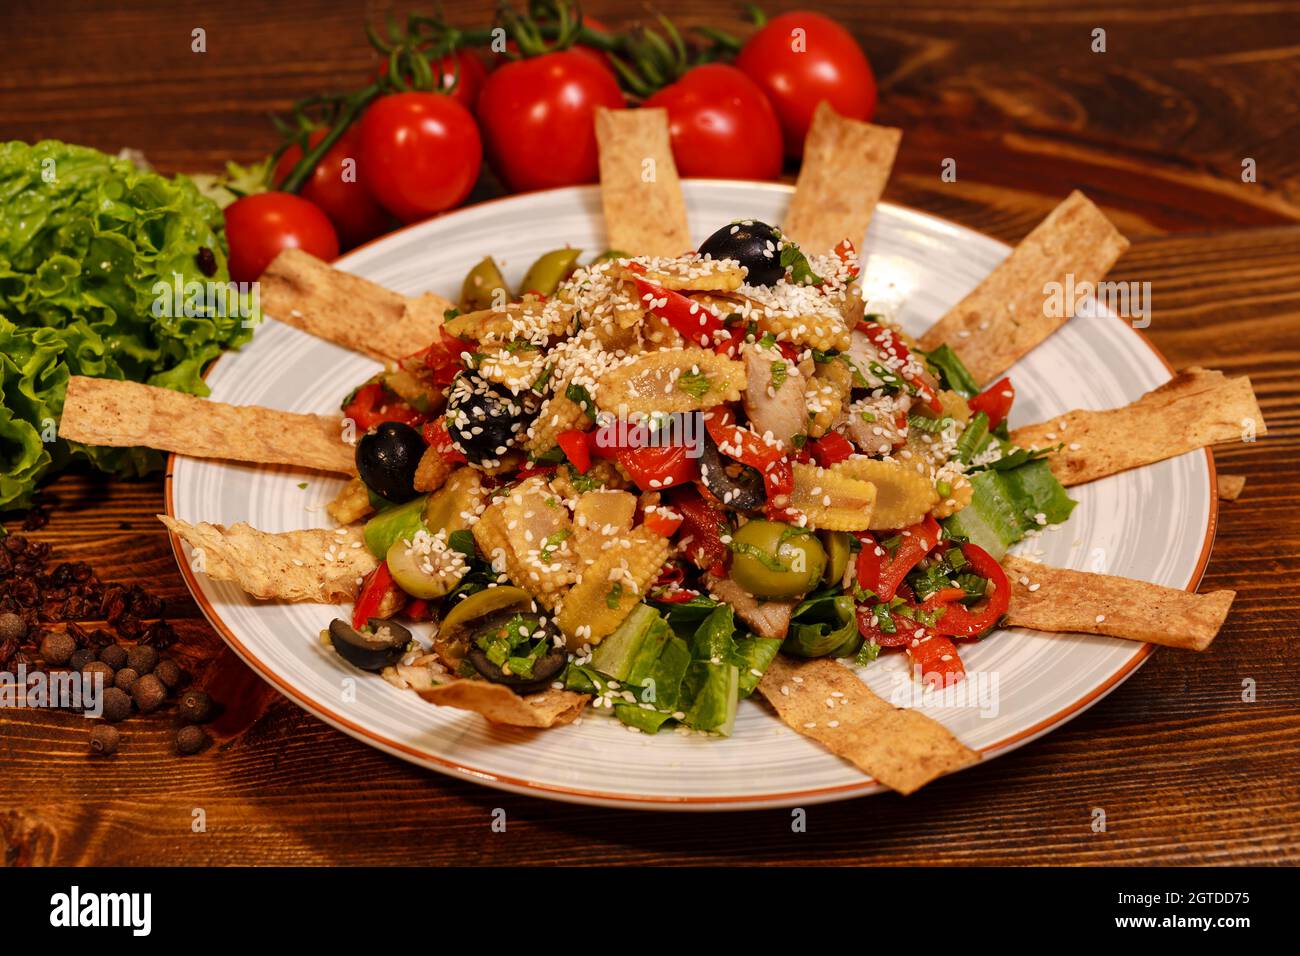 Tasty salad in plate with olives, marinated baby corns, meat, pepper and other ingredients. Stock Photo